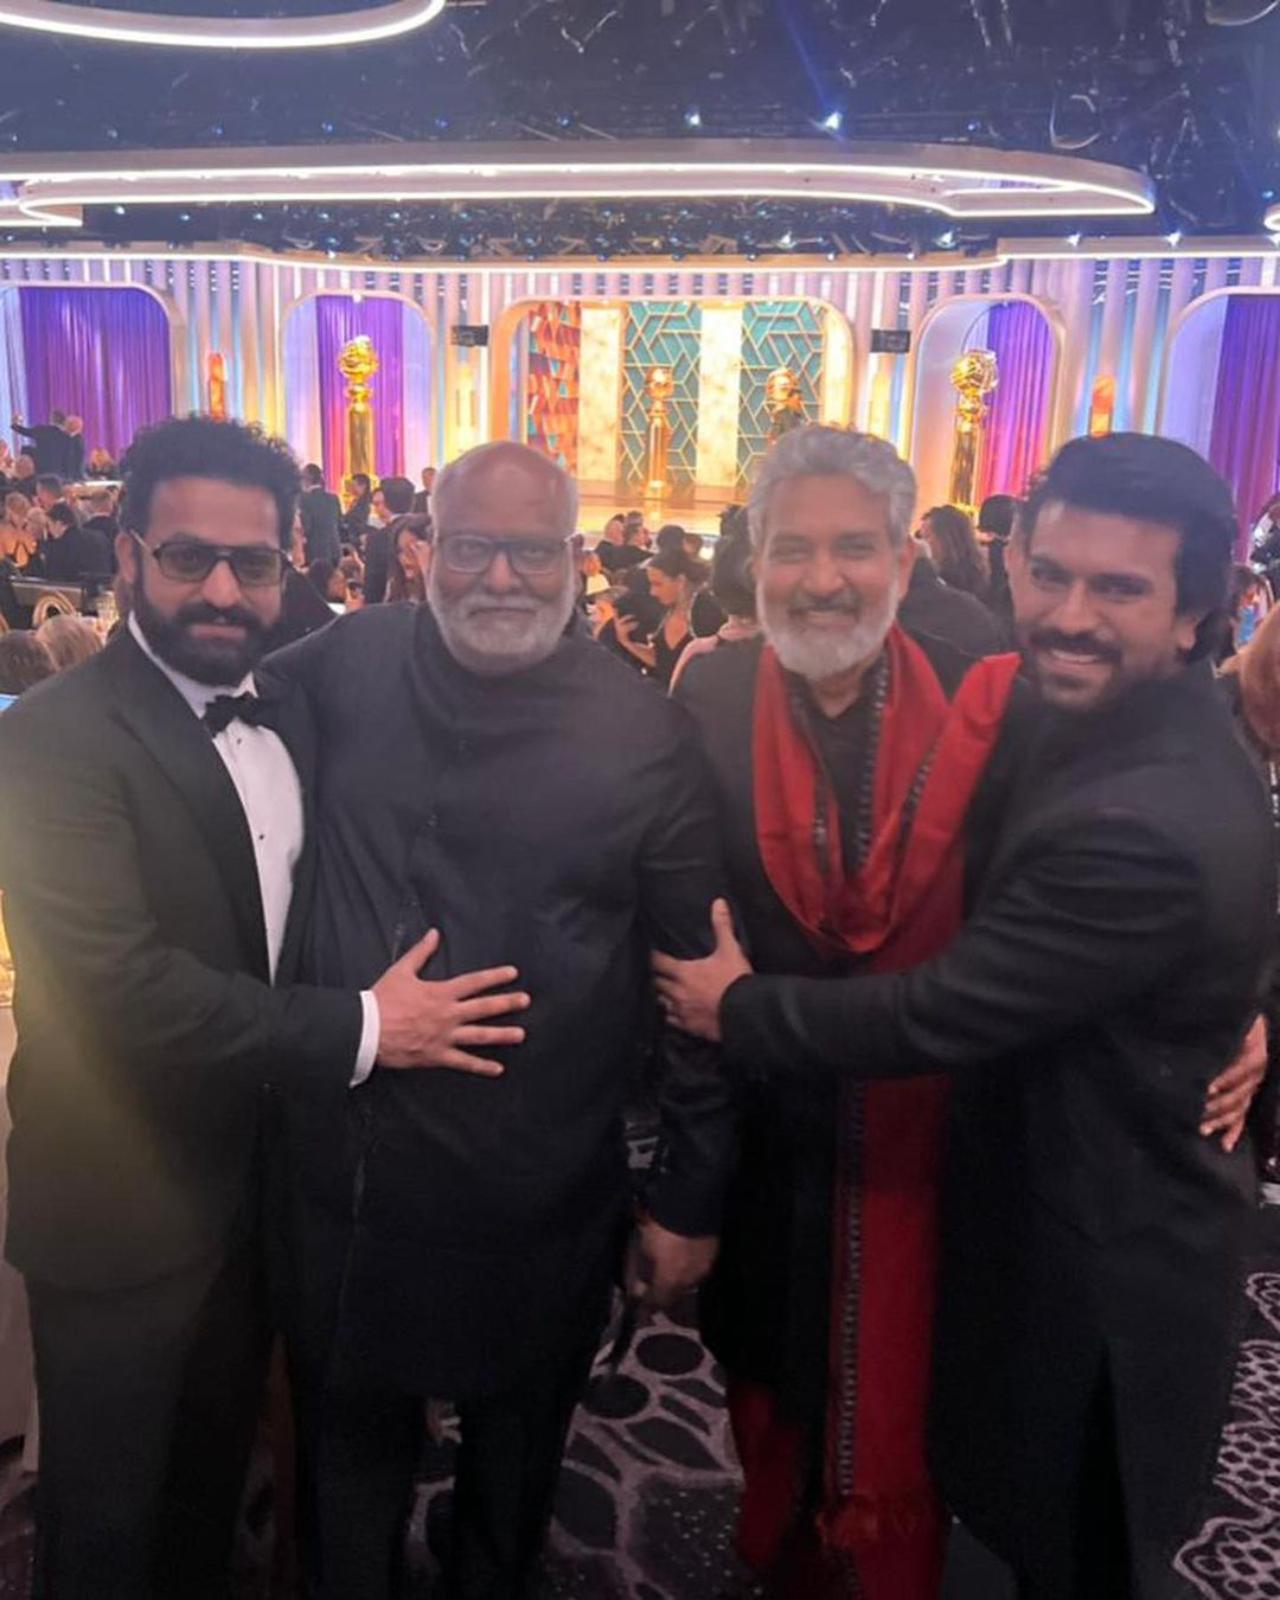 The four men were all thrilled after their win at the Golden Globes. As soon as the winner of the Best Original Song was announced, the RRR team stood up in joy and celebrated the moment. Ram Charan took to his Instagram handle to share a picture from inside the ceremony room. He is seen posing with SS Rajamouli, MM Keeravani, and Jr NTR